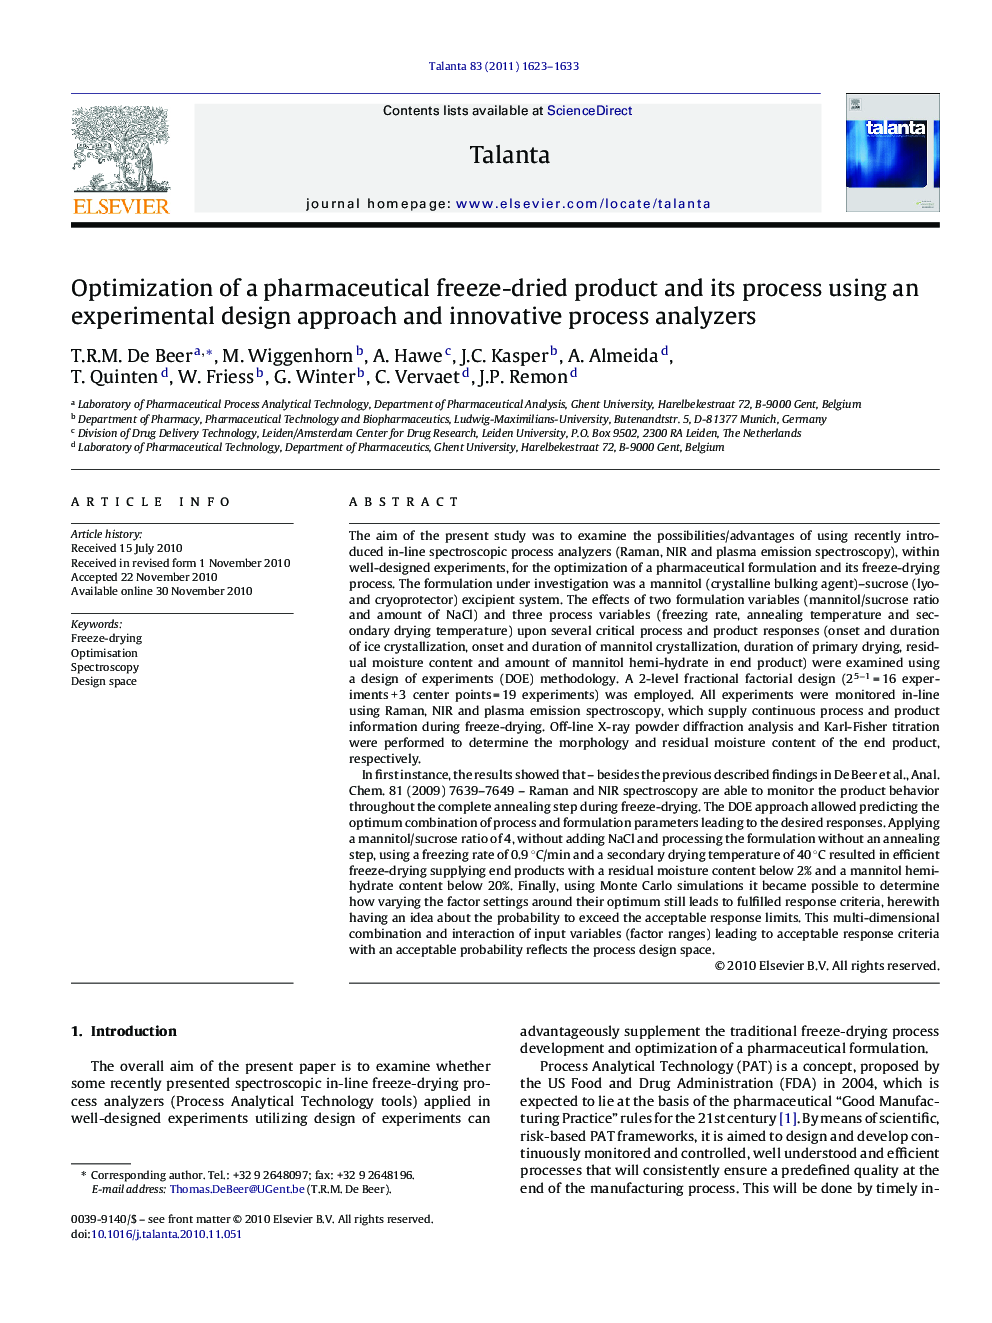 Optimization of a pharmaceutical freeze-dried product and its process using an experimental design approach and innovative process analyzers